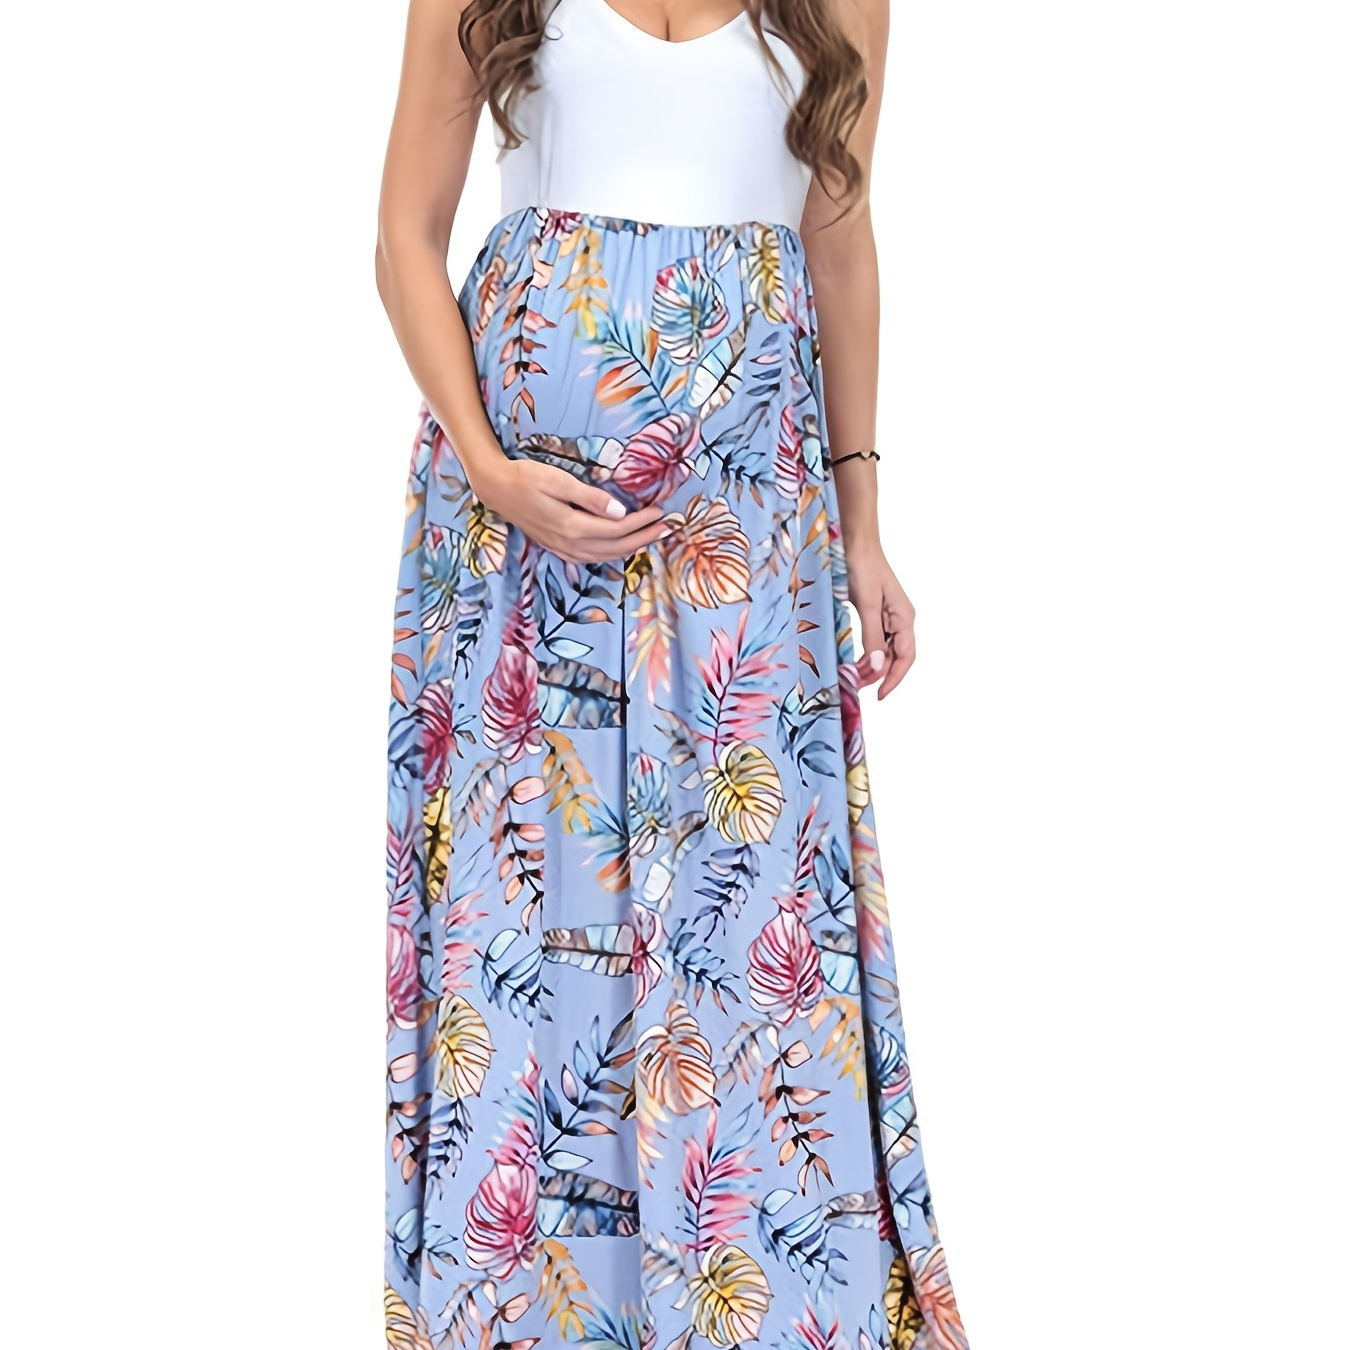 Sleeveless Flower Print Maternity Dress Maternity Clothes For Pregnant ...